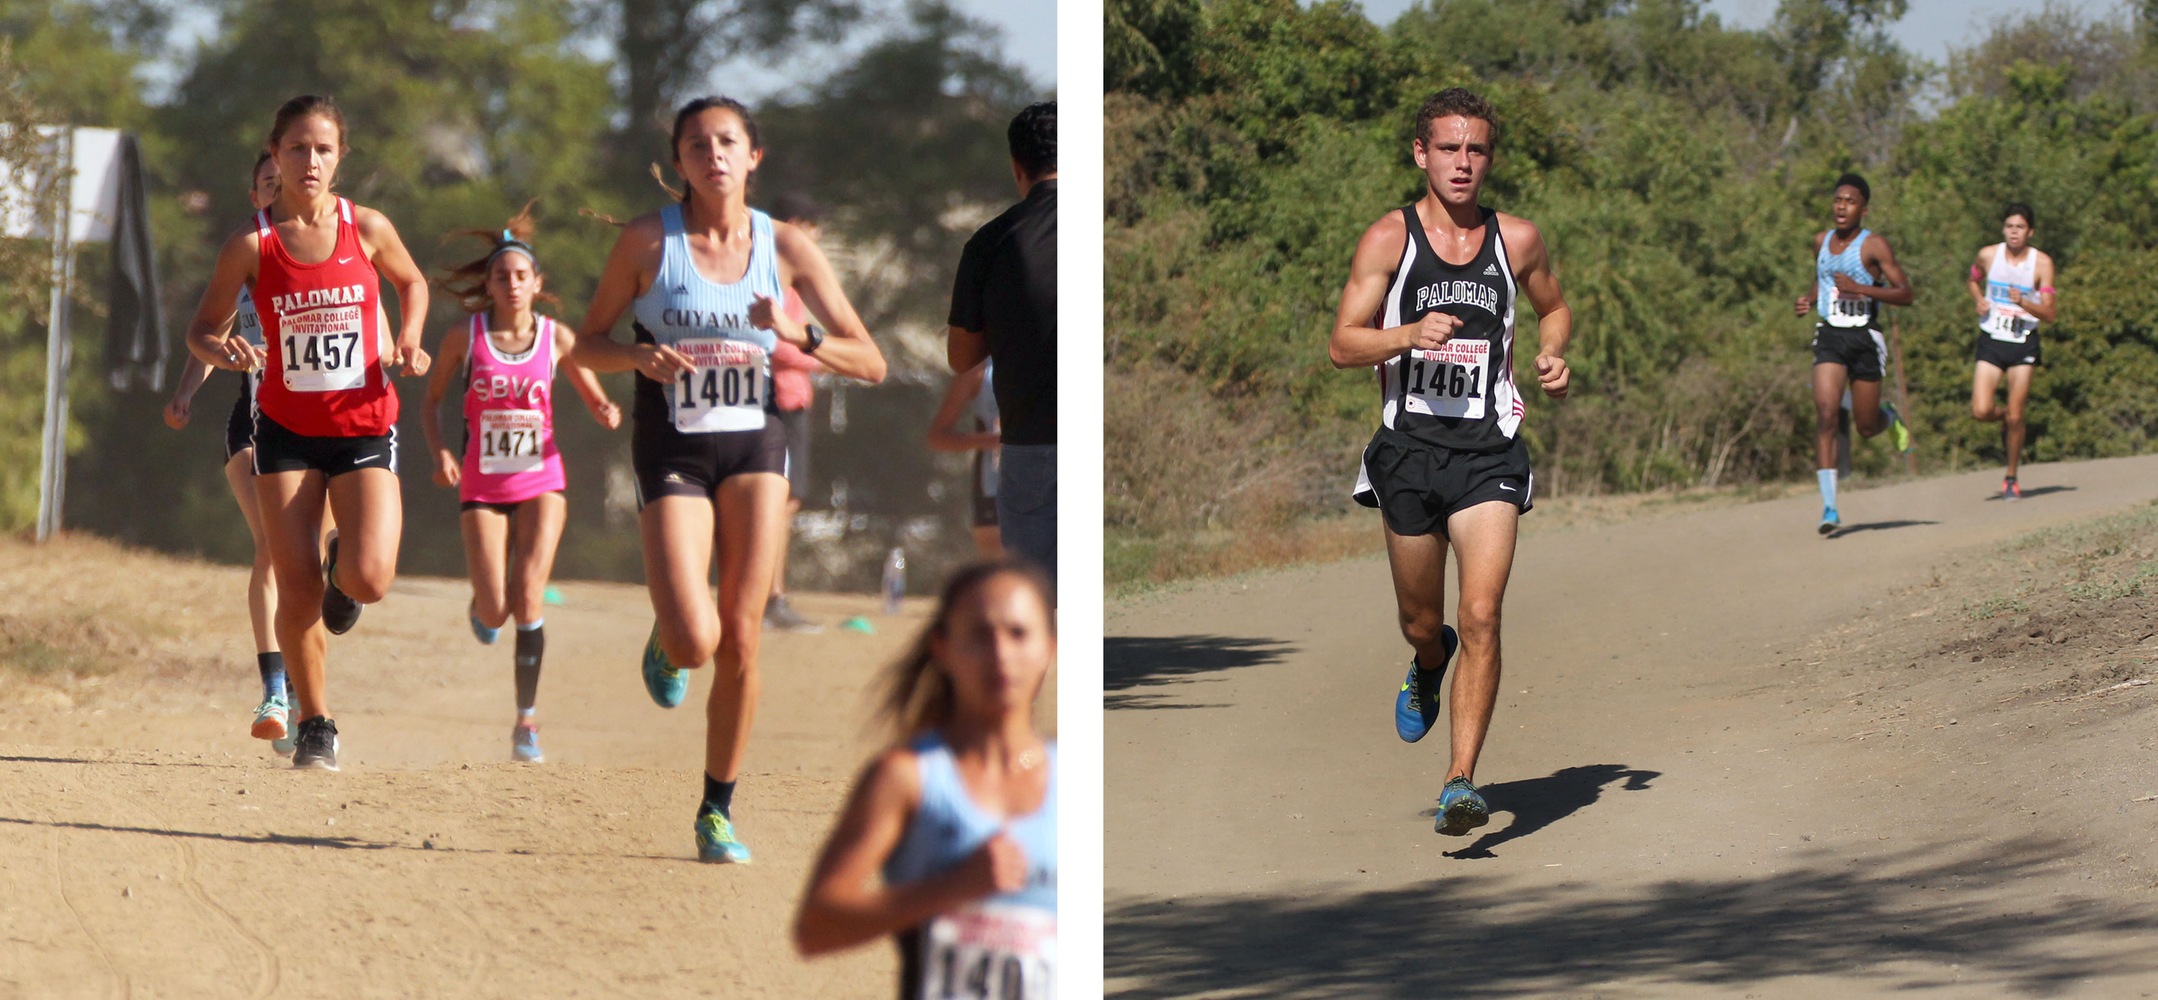 Palomar's Hannah Lopez and Chris Allen run to fifth-place finishes. -- Photos by Hugh Cox